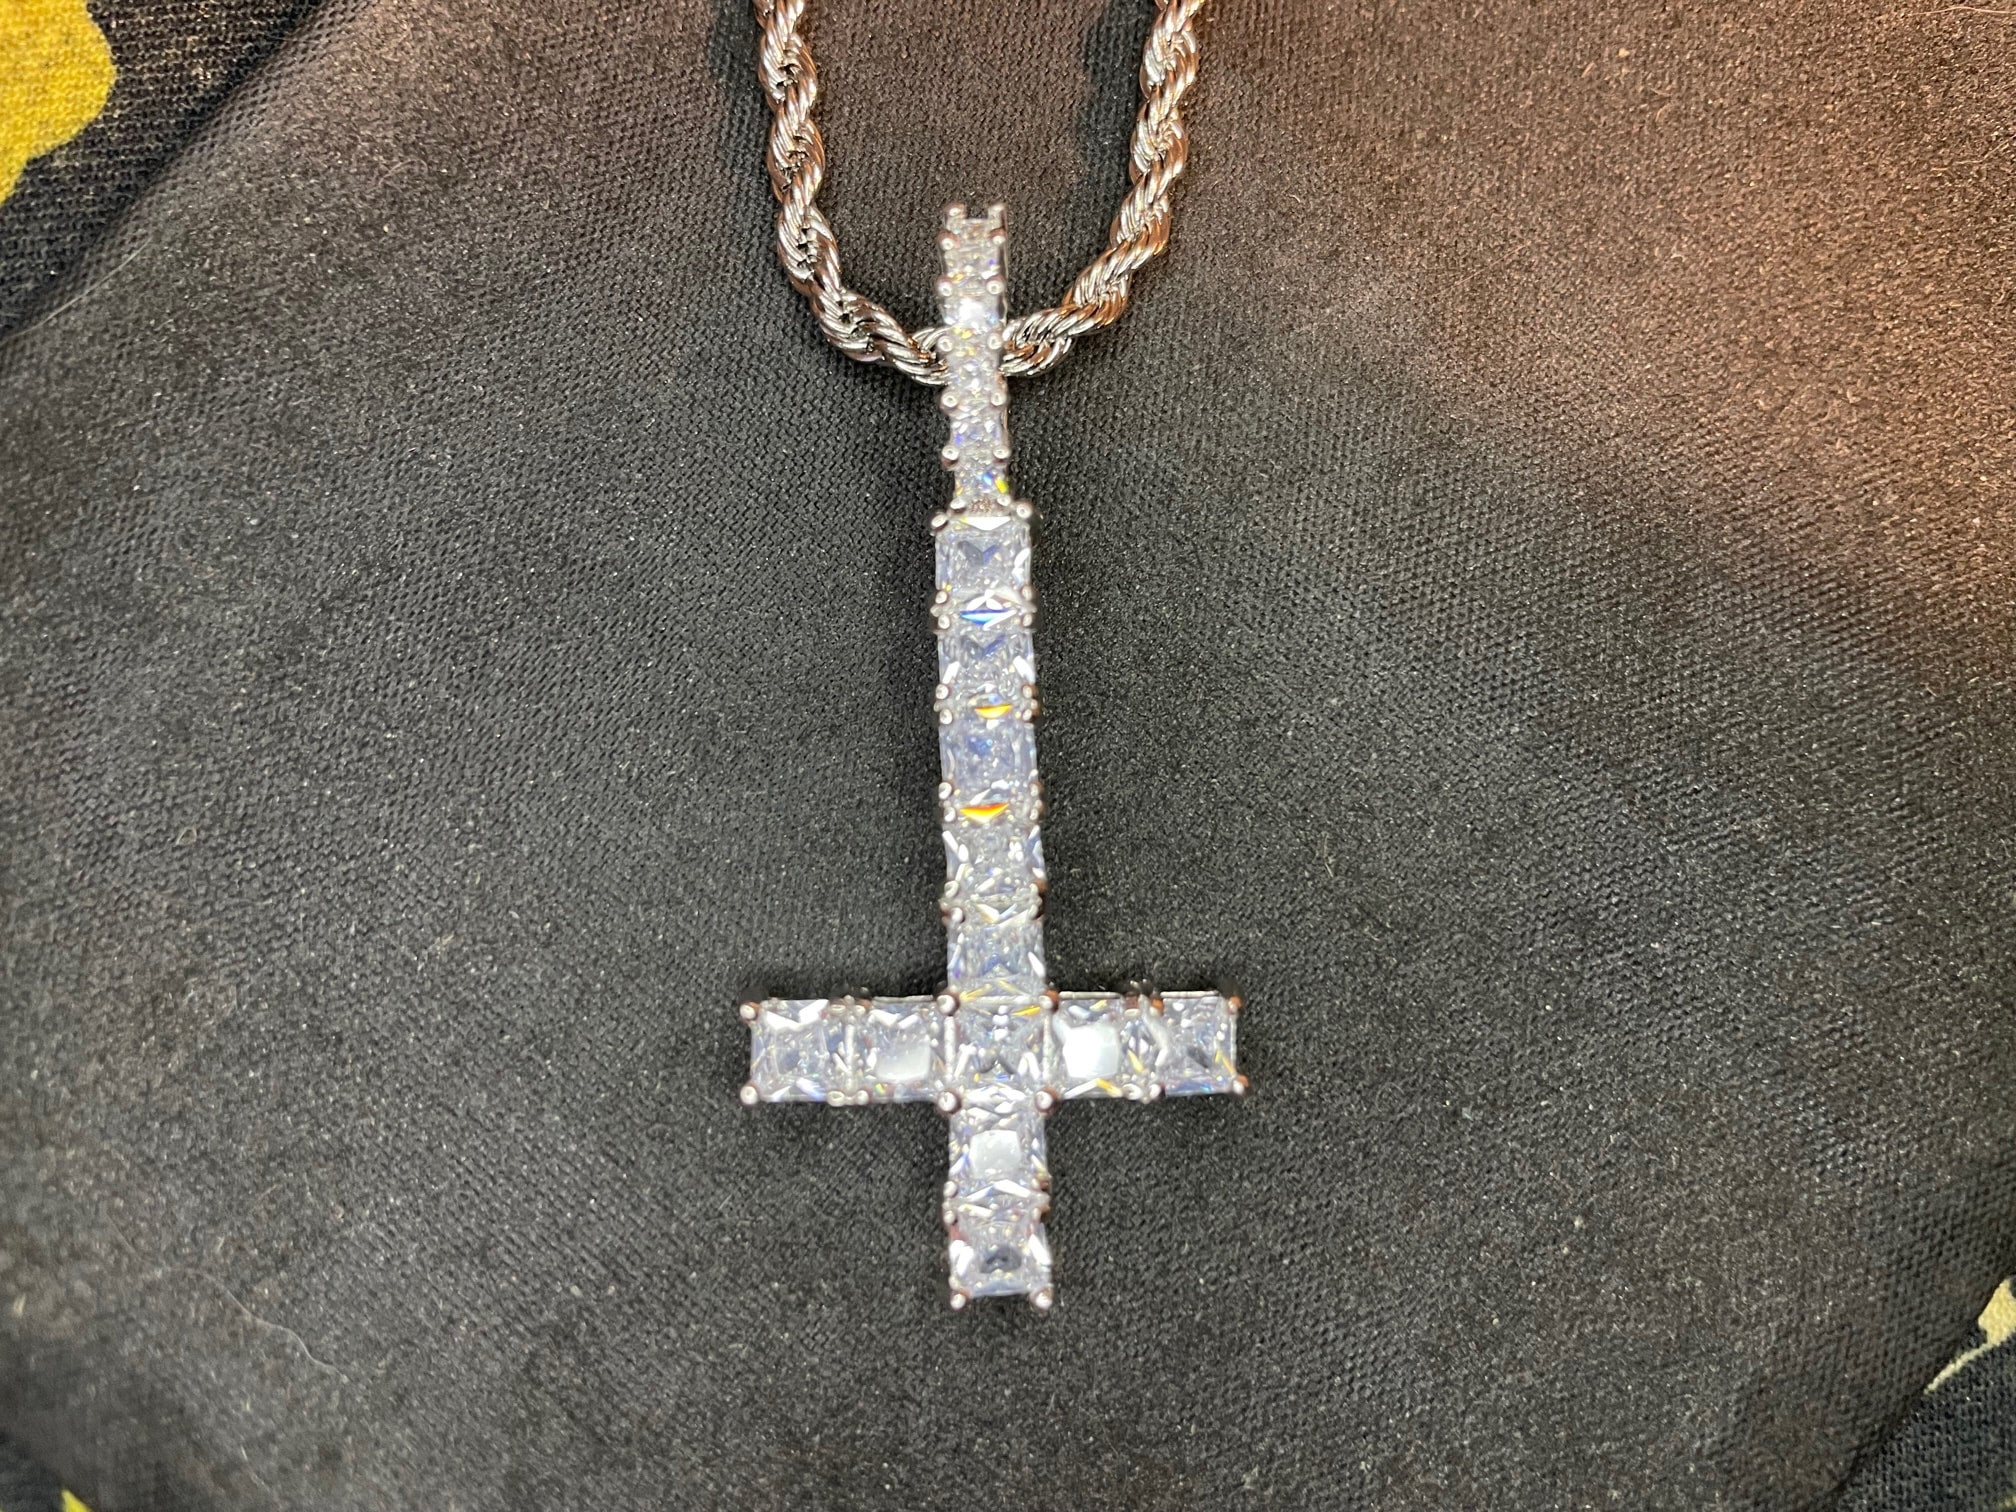 Bling or blasphemy? Upside-down and sideways crosses showing up in fashion  | Chattanooga Times Free Press